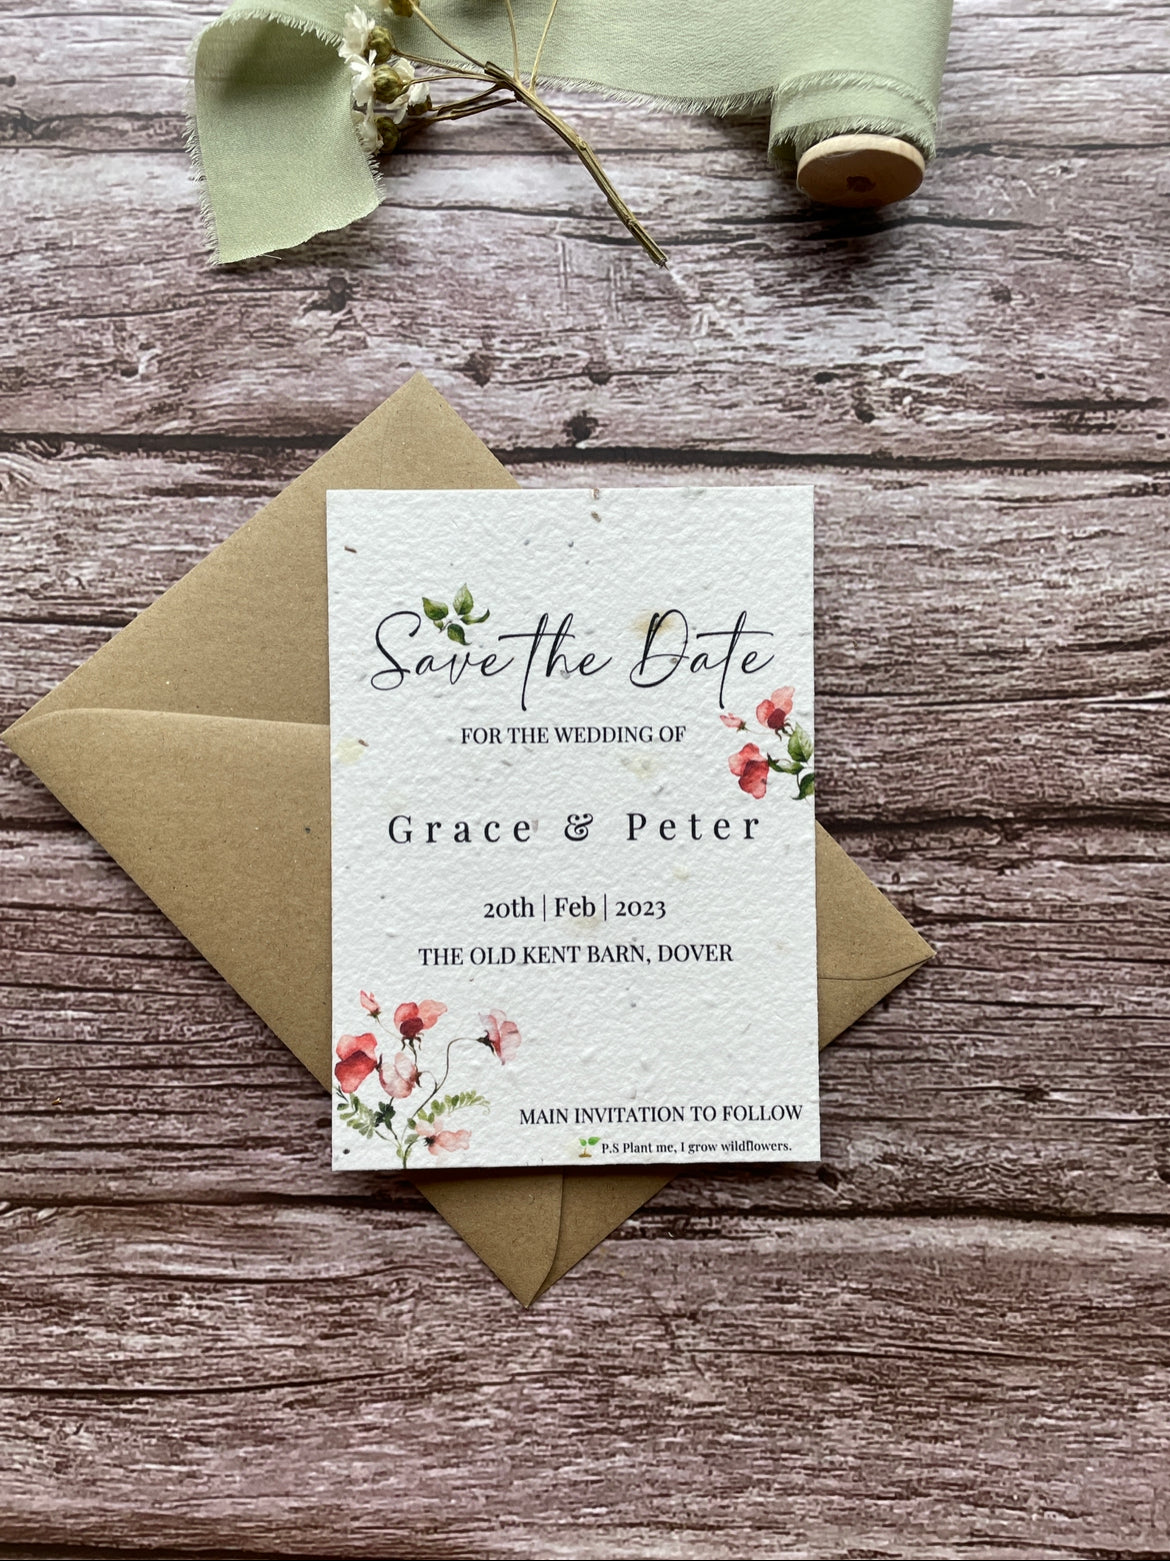 Sweet Pea - Save the Date Invites